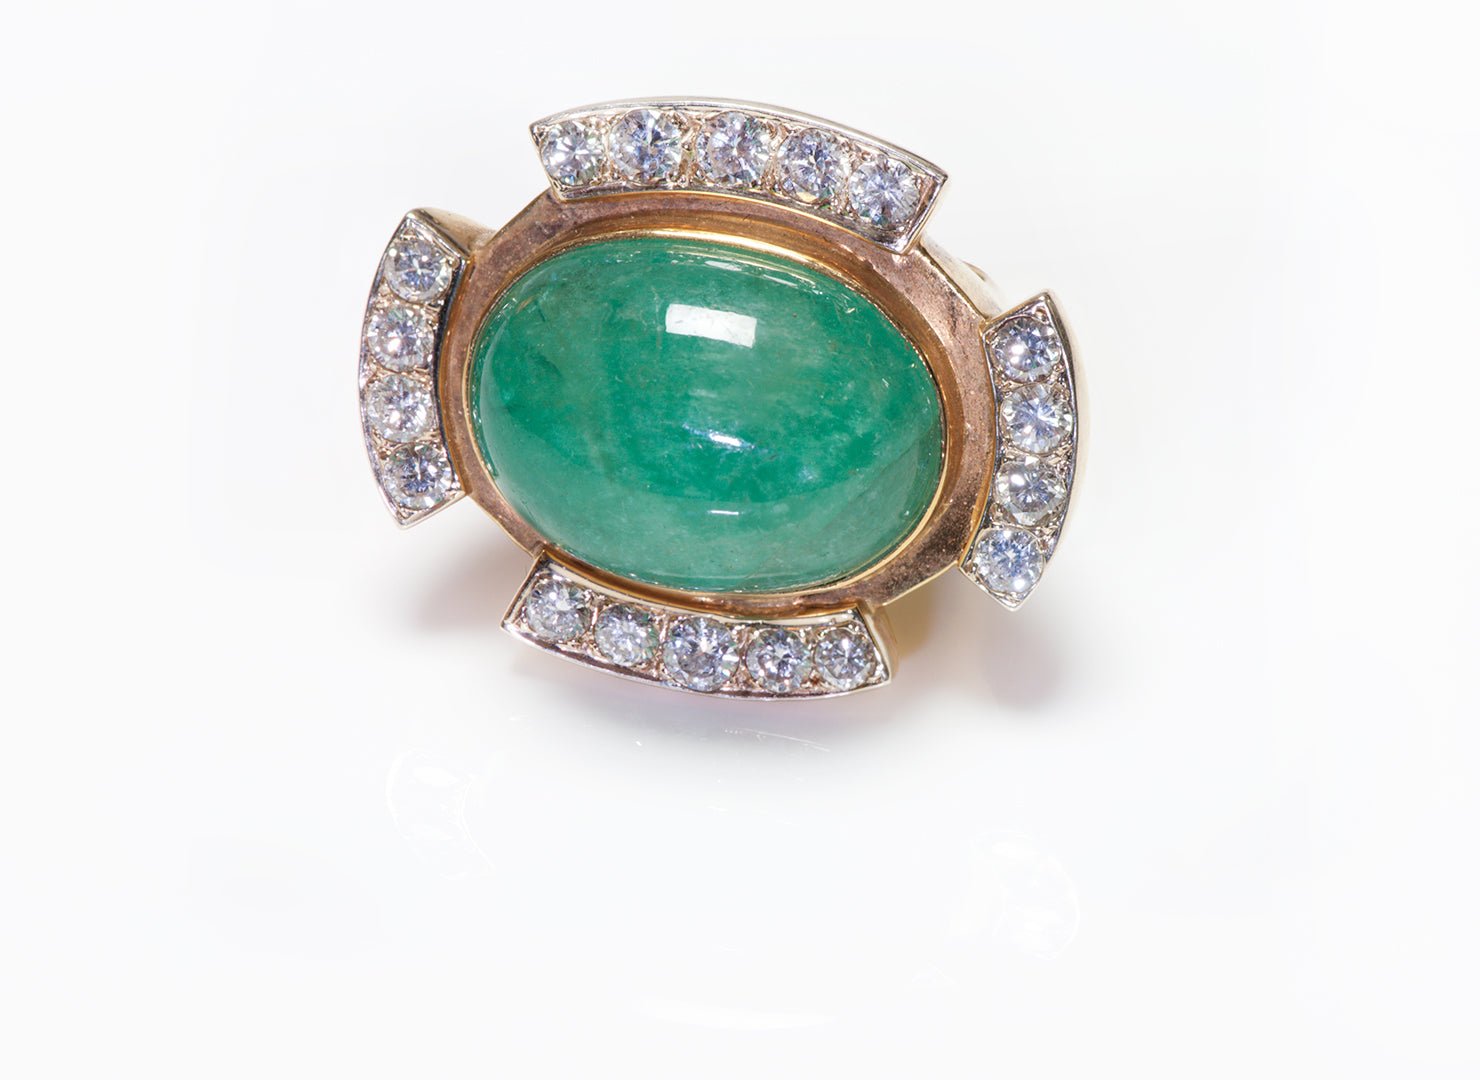 Antique or Vintage Emerald Jewelry will Make you Feel Like a Queen - DSF Antique Jewelry